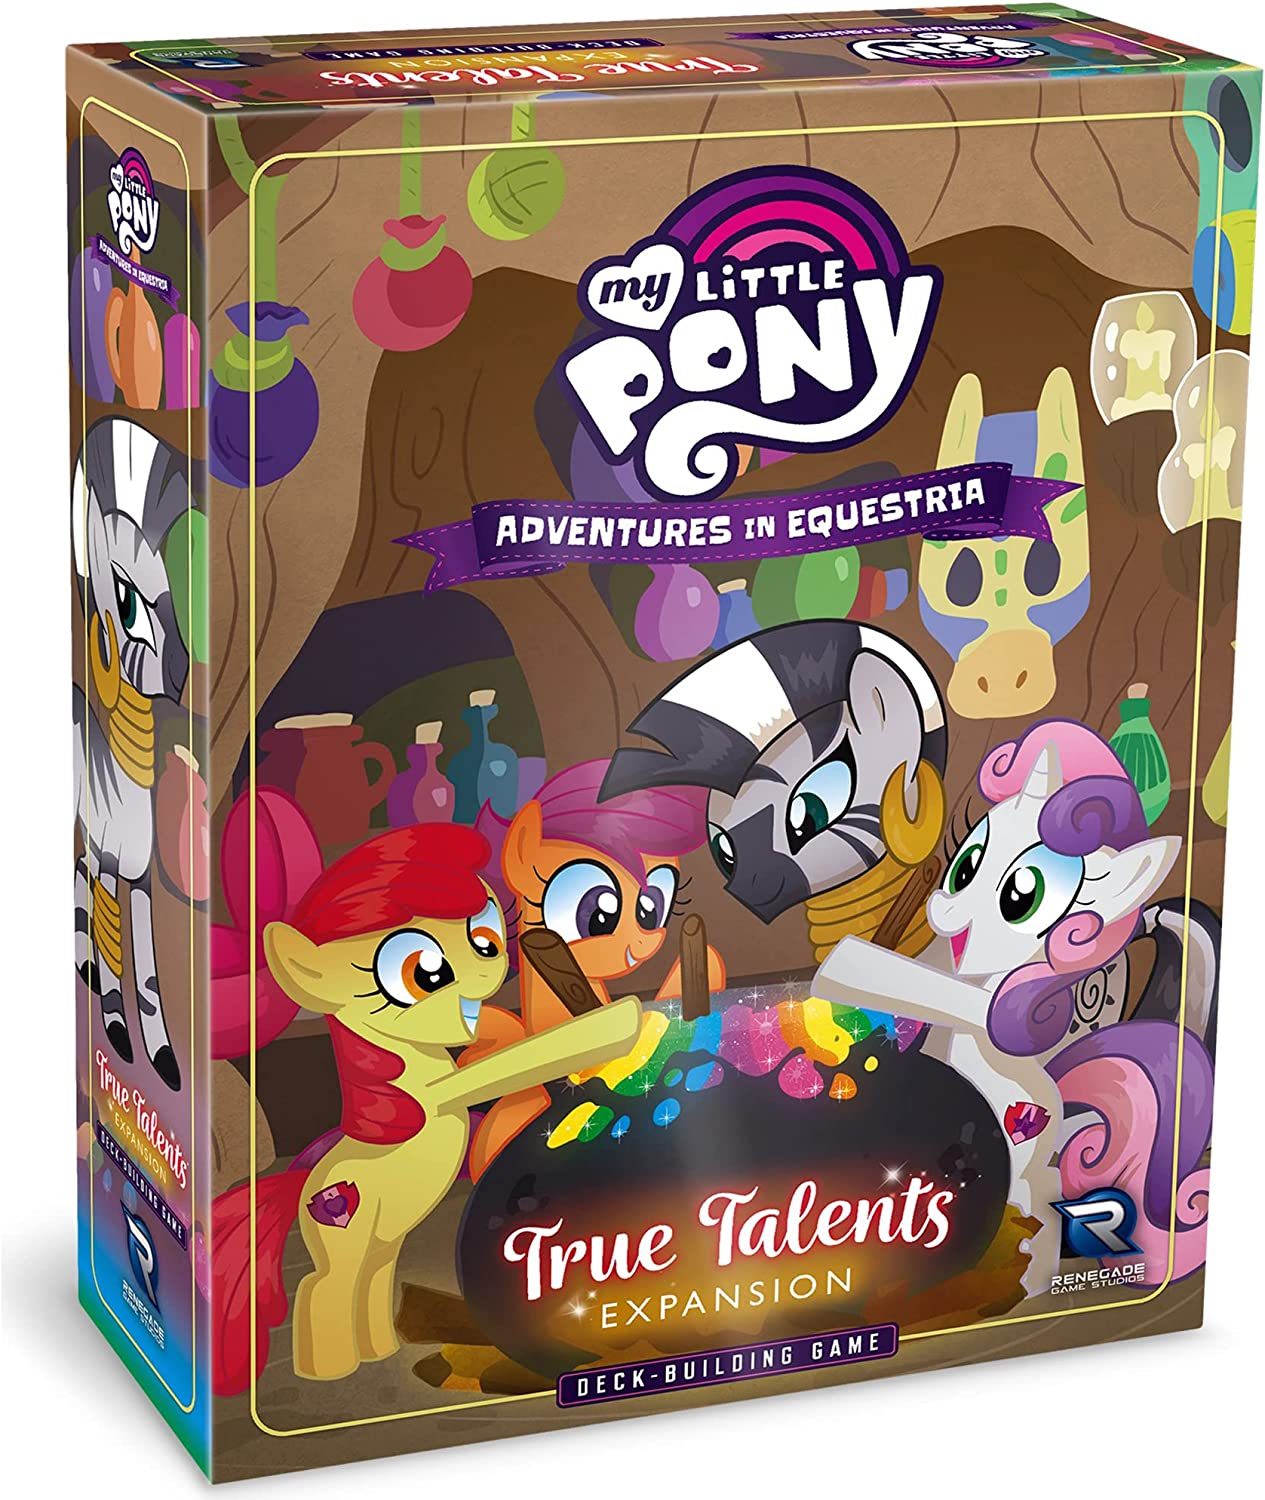 MLP Adventures in Equestria True Talents Expansion Deck-Building Game 1